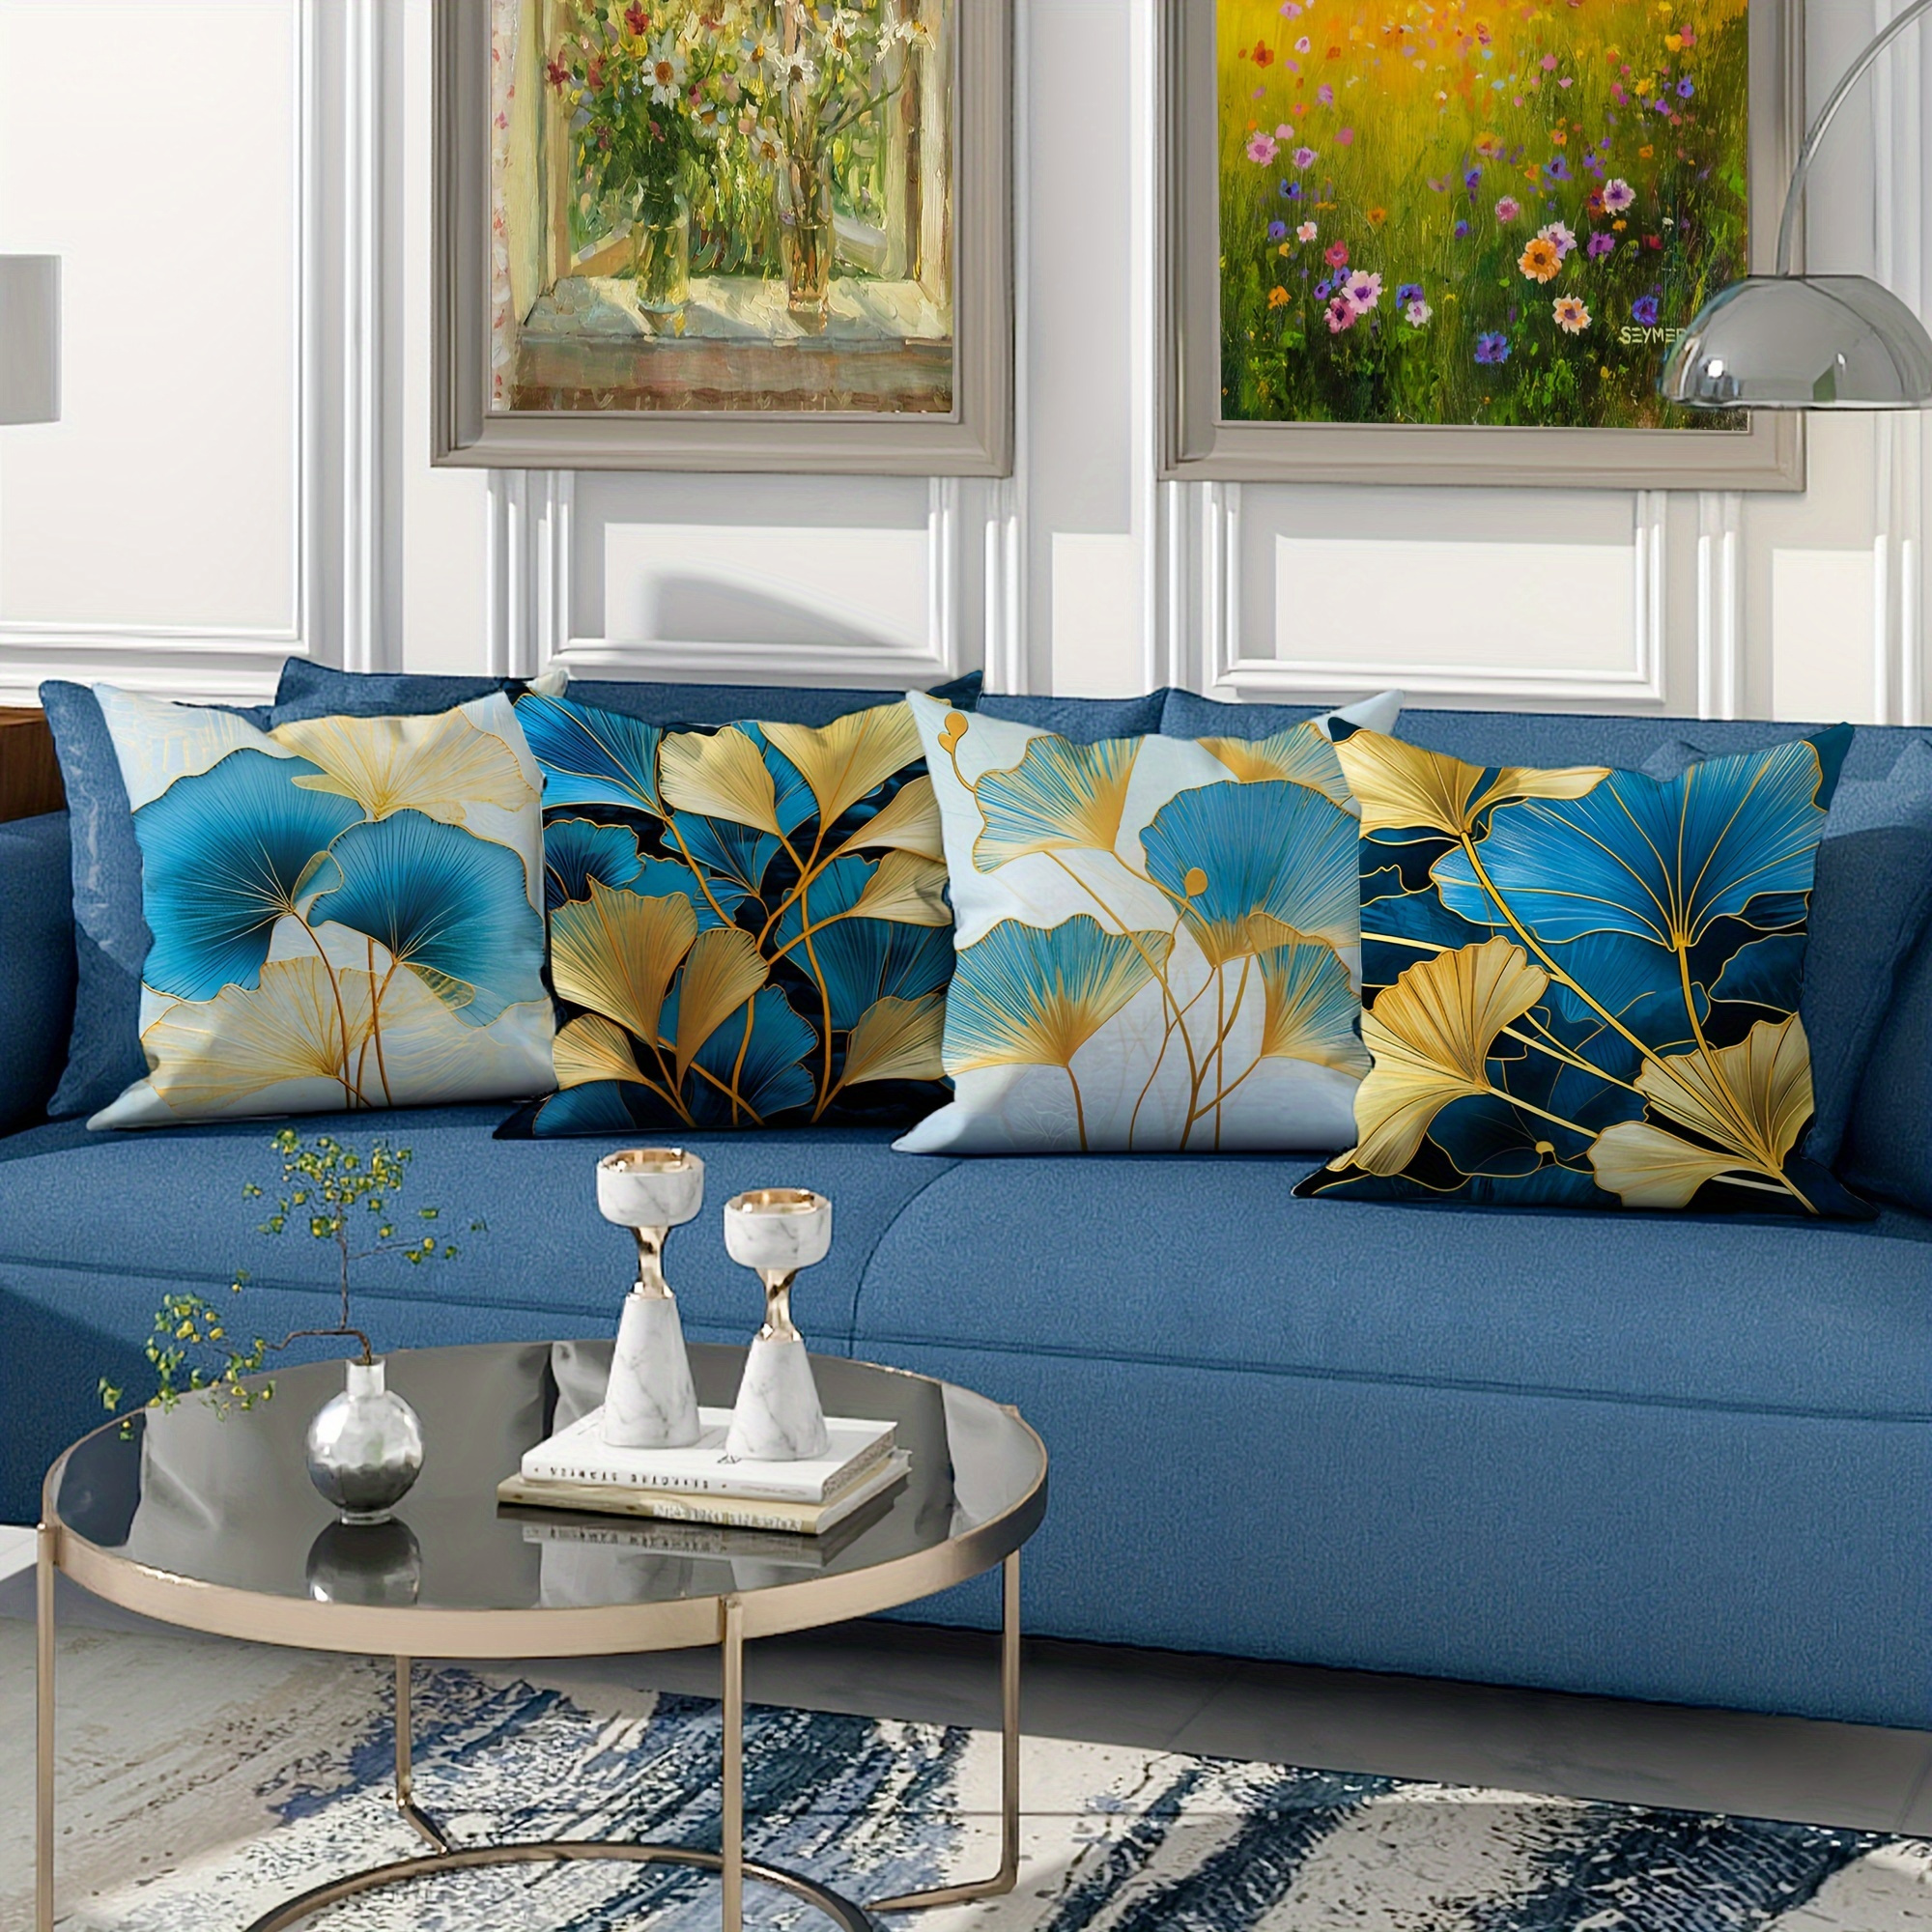 

4-piece Set Turquoise & Golden Ginkgo Leaf Throw Pillow Covers - Soft Polyester, Zip Closure, Machine Washable - Perfect For Living Room, Bedroom, And Sofa Decor, 18x18 Inches